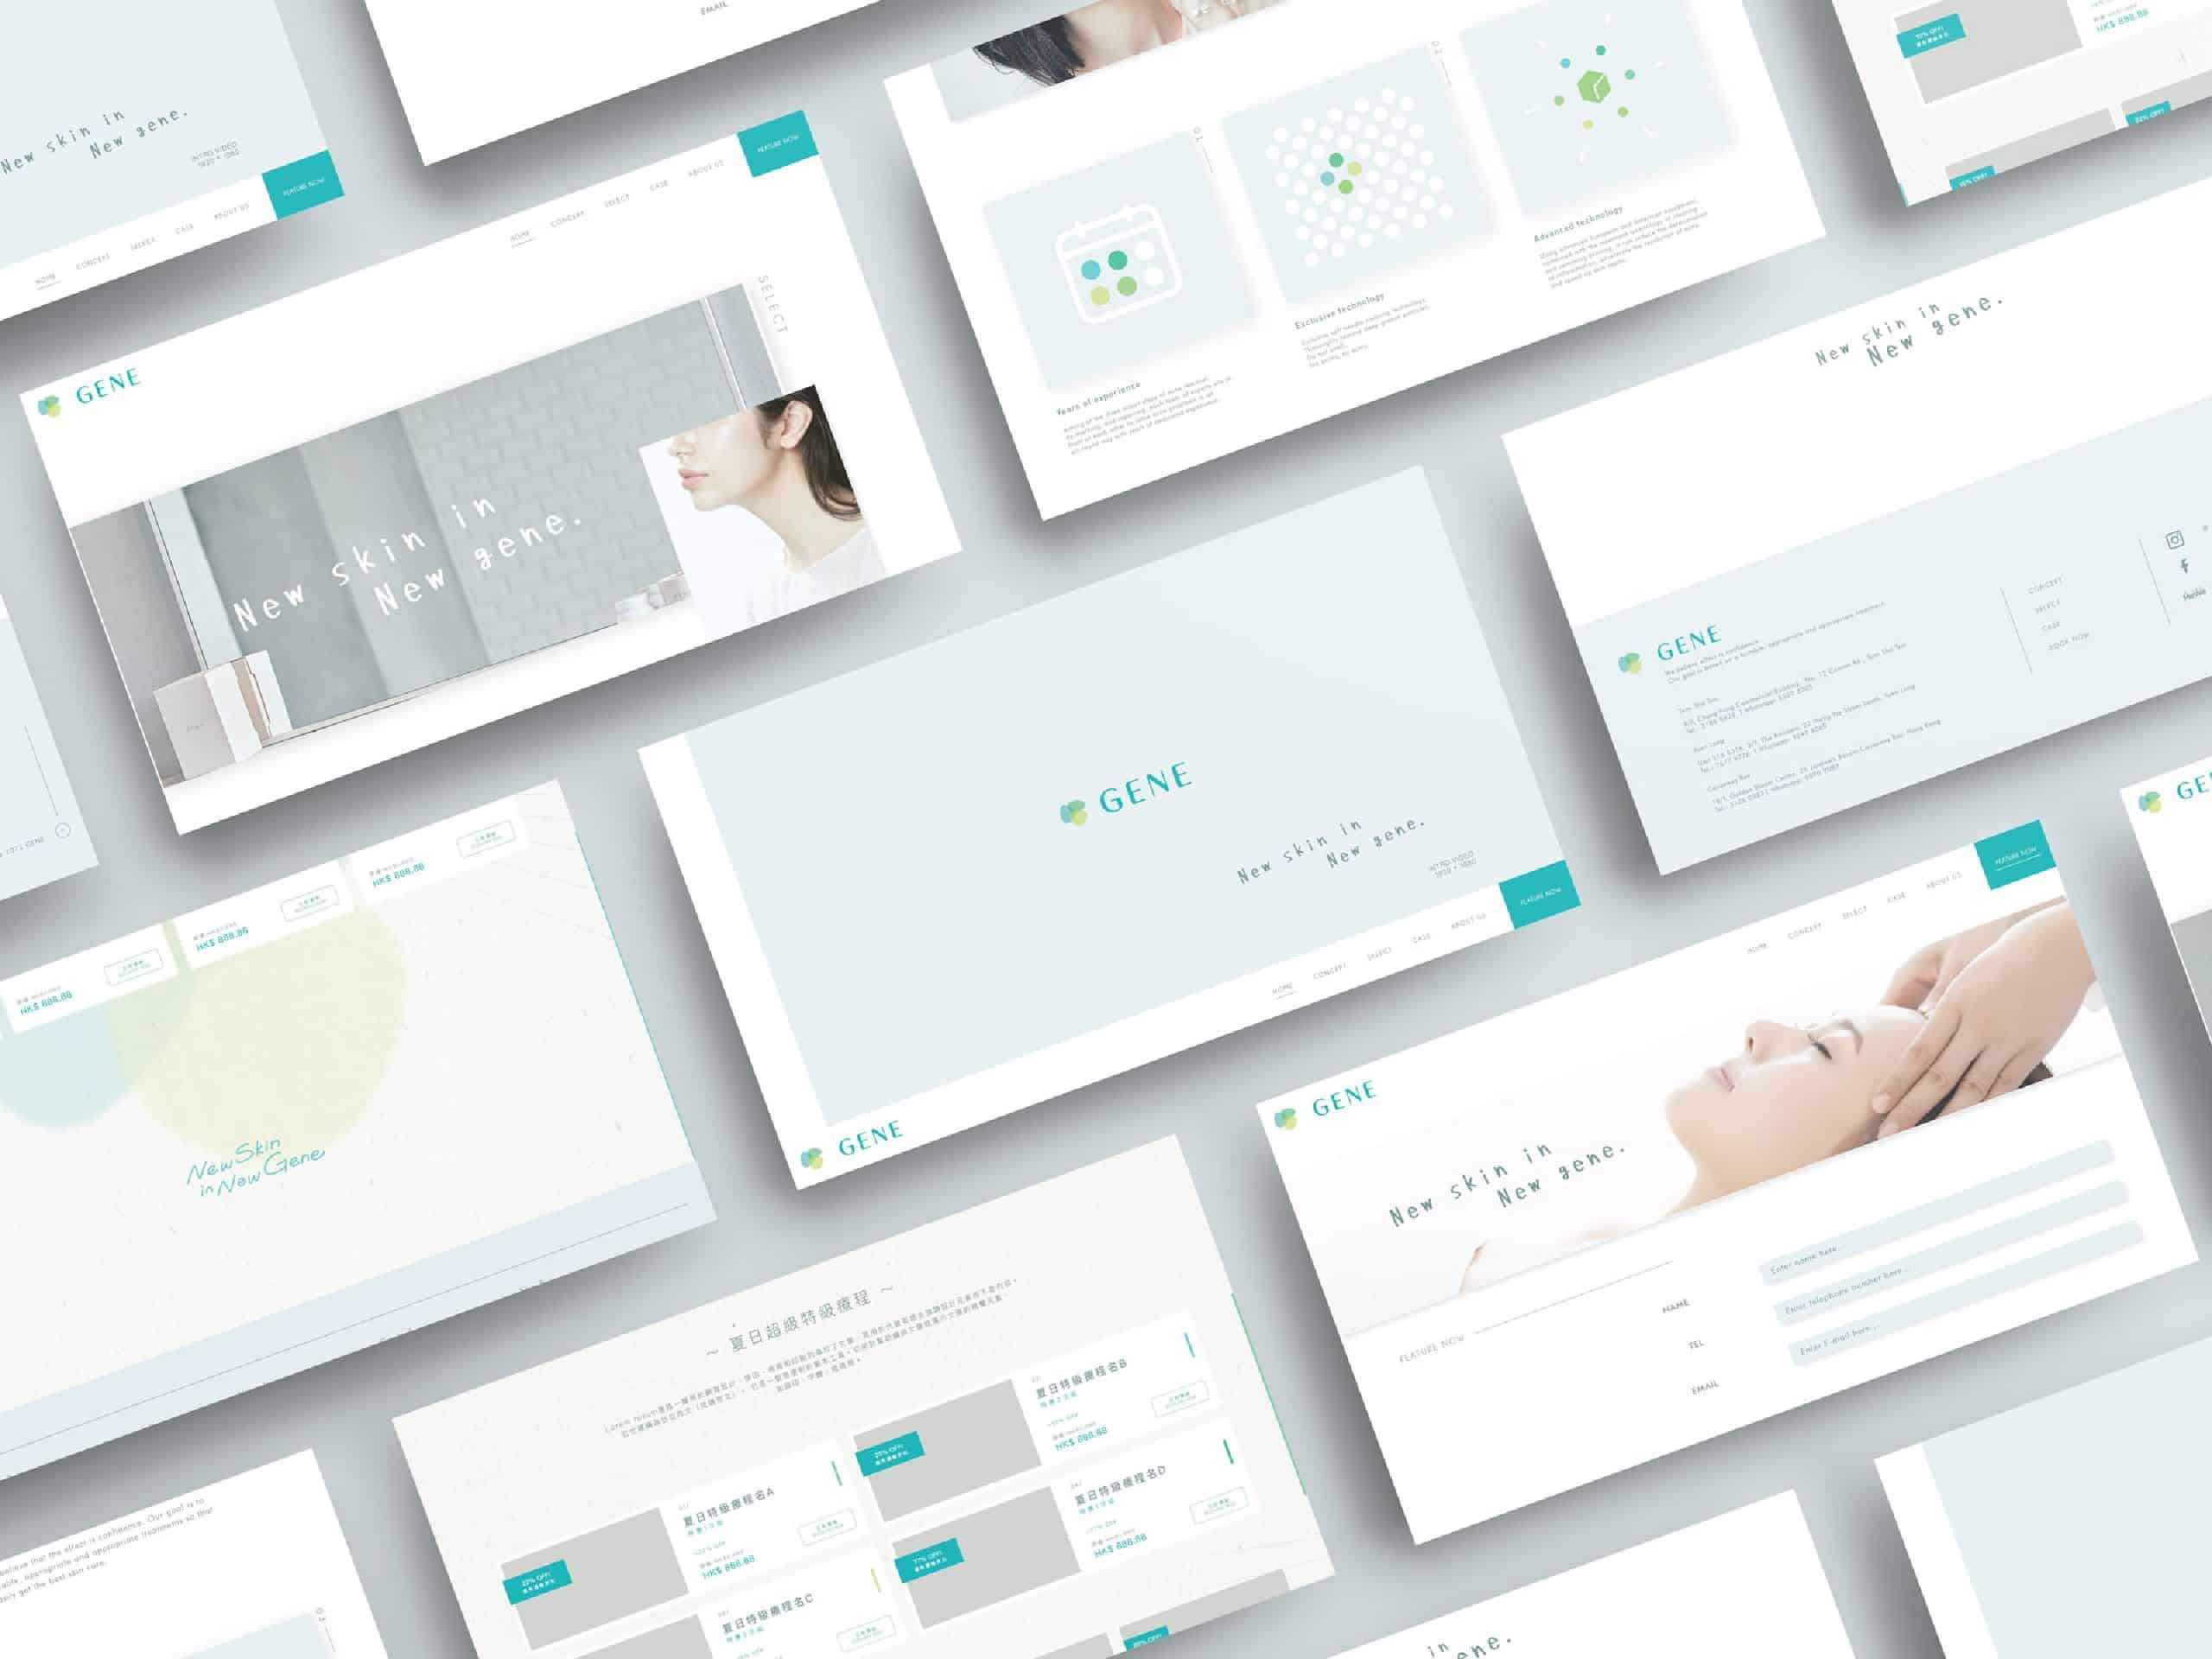 UI Showcase Mockup Pack by Anthony Boyd Graphics